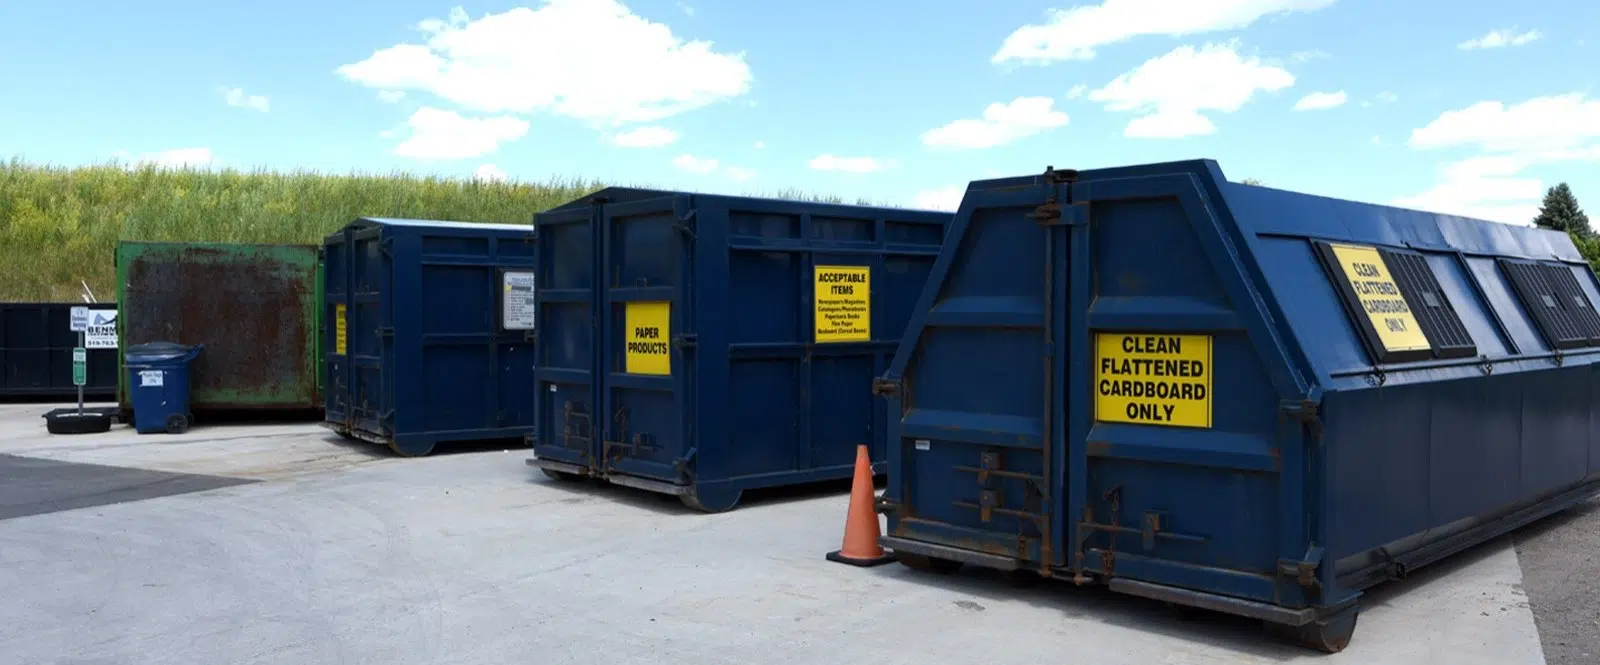 WELLINGTON COUNTY TO RE-OPEN ALL WASTE FACILITIES BEGINNING MAY 26TH